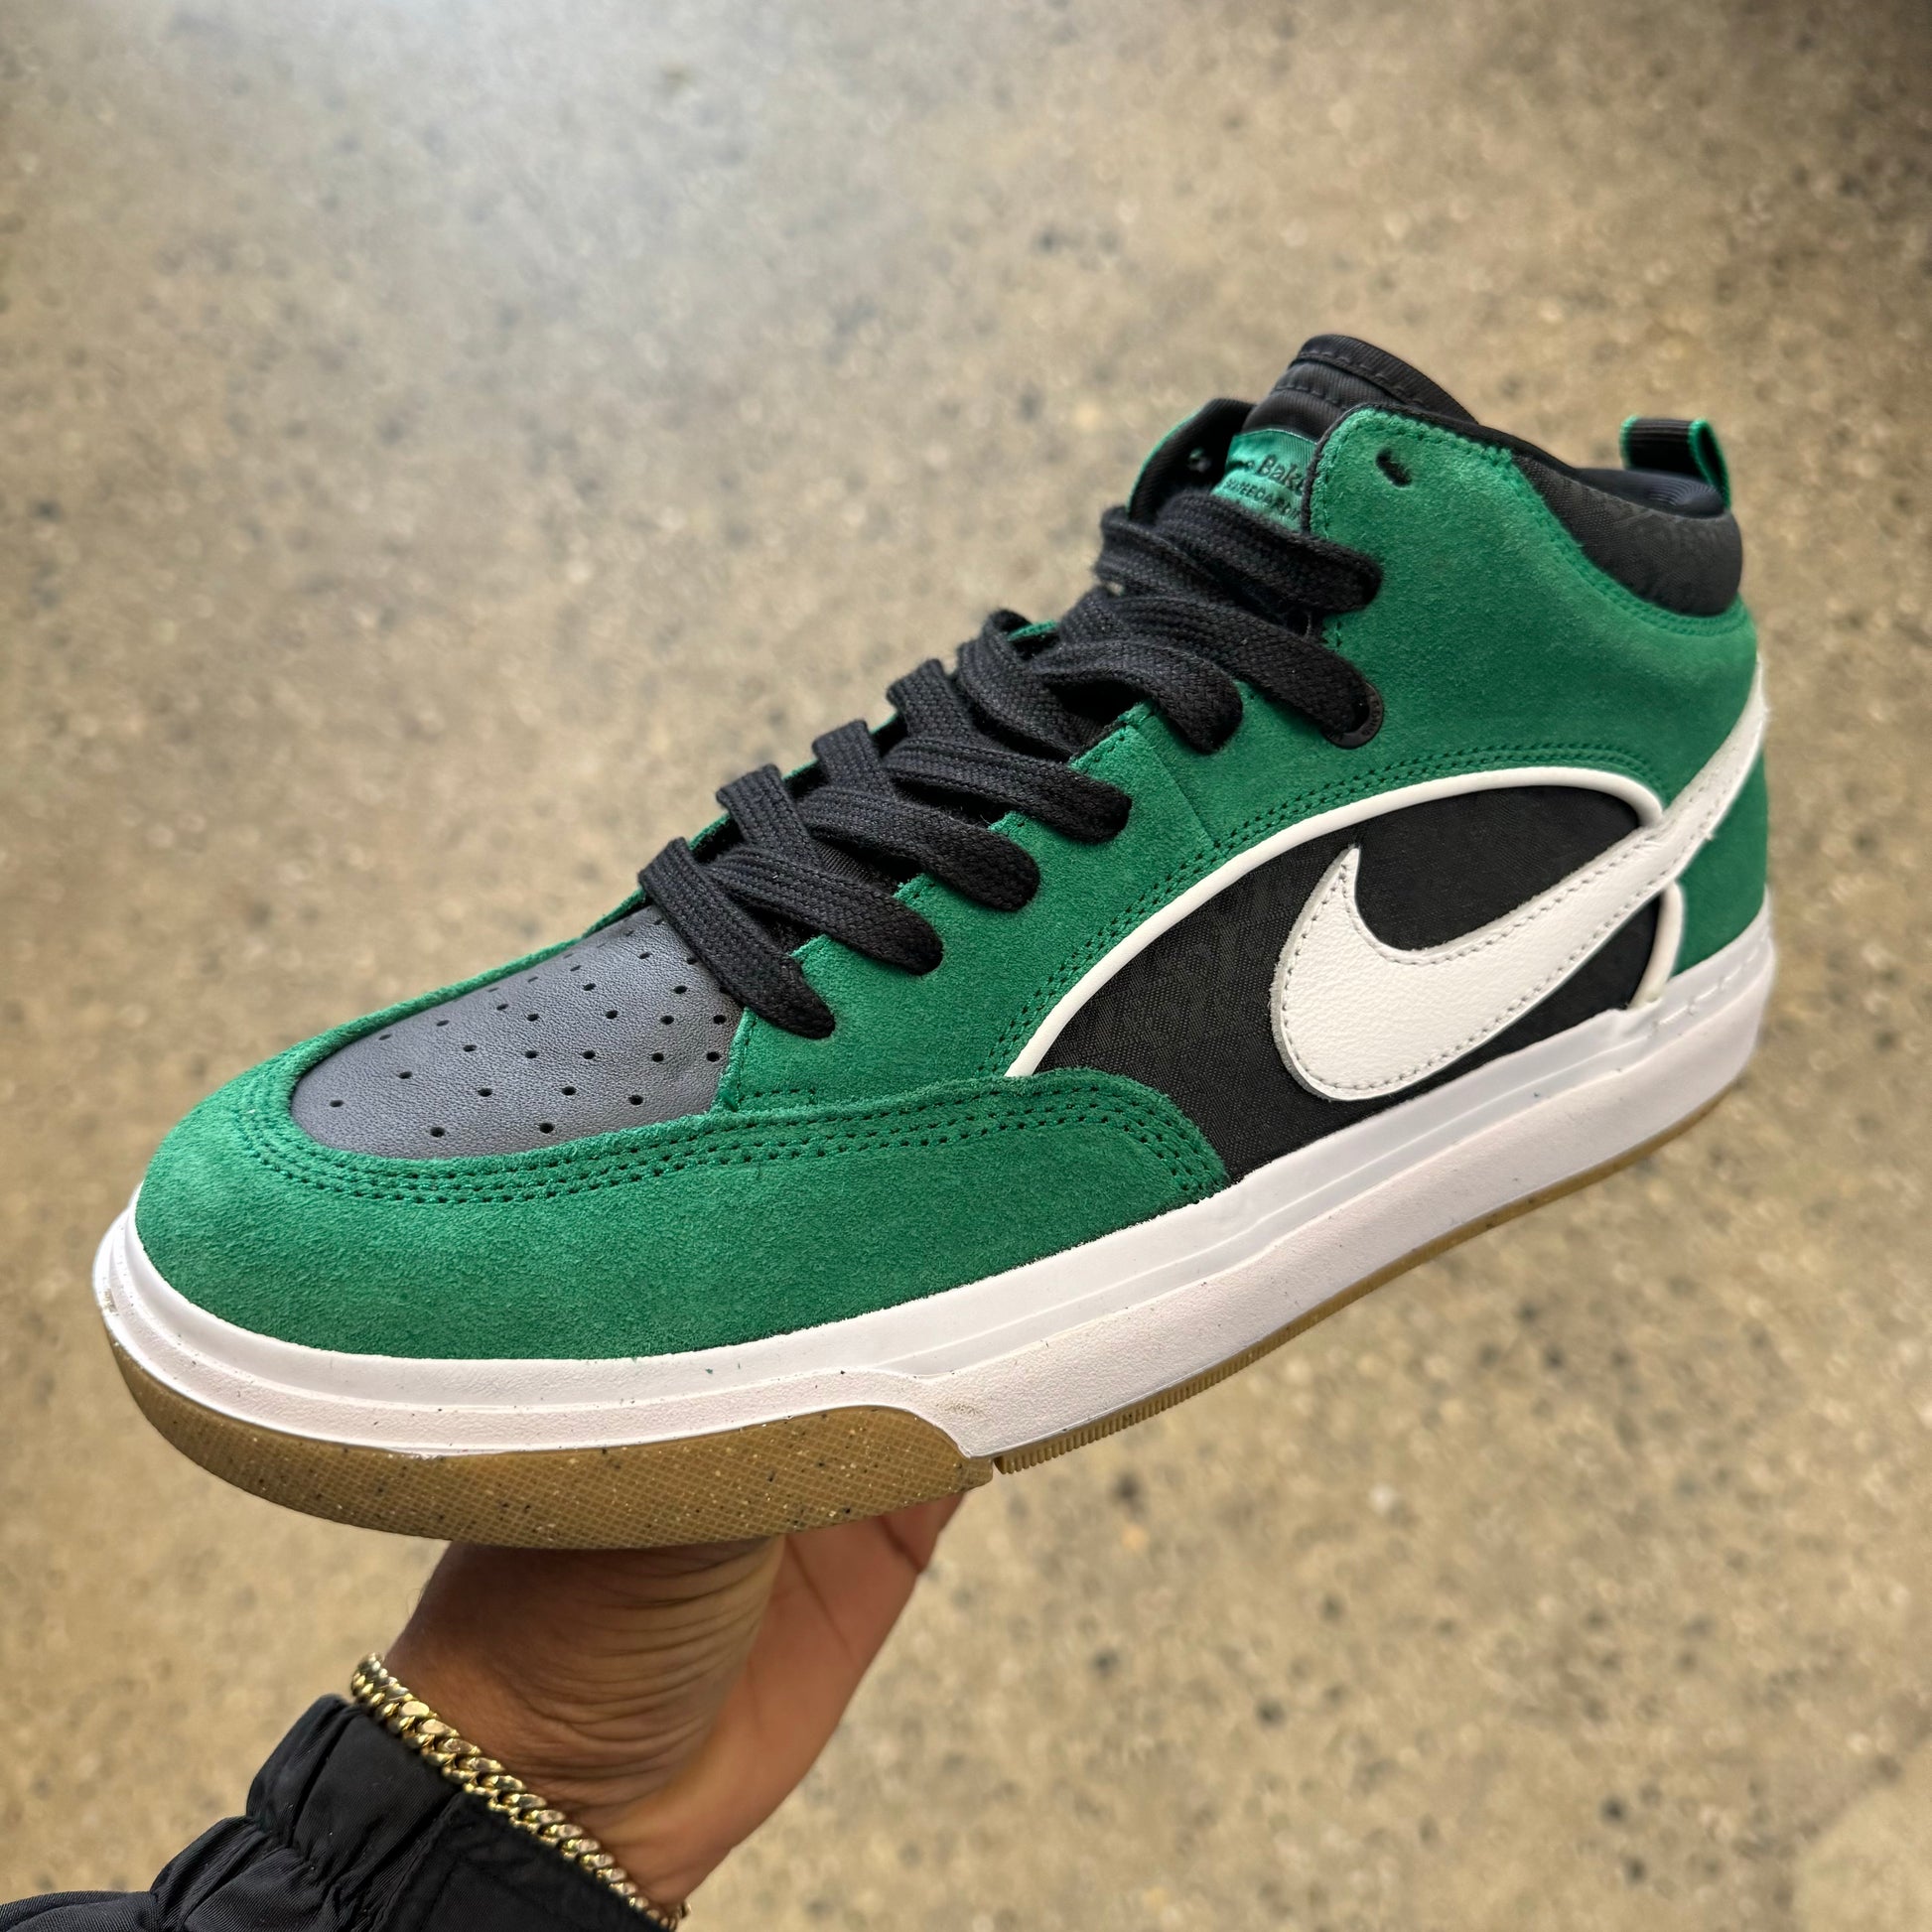 green, black, and white sneaker with white and brown sole